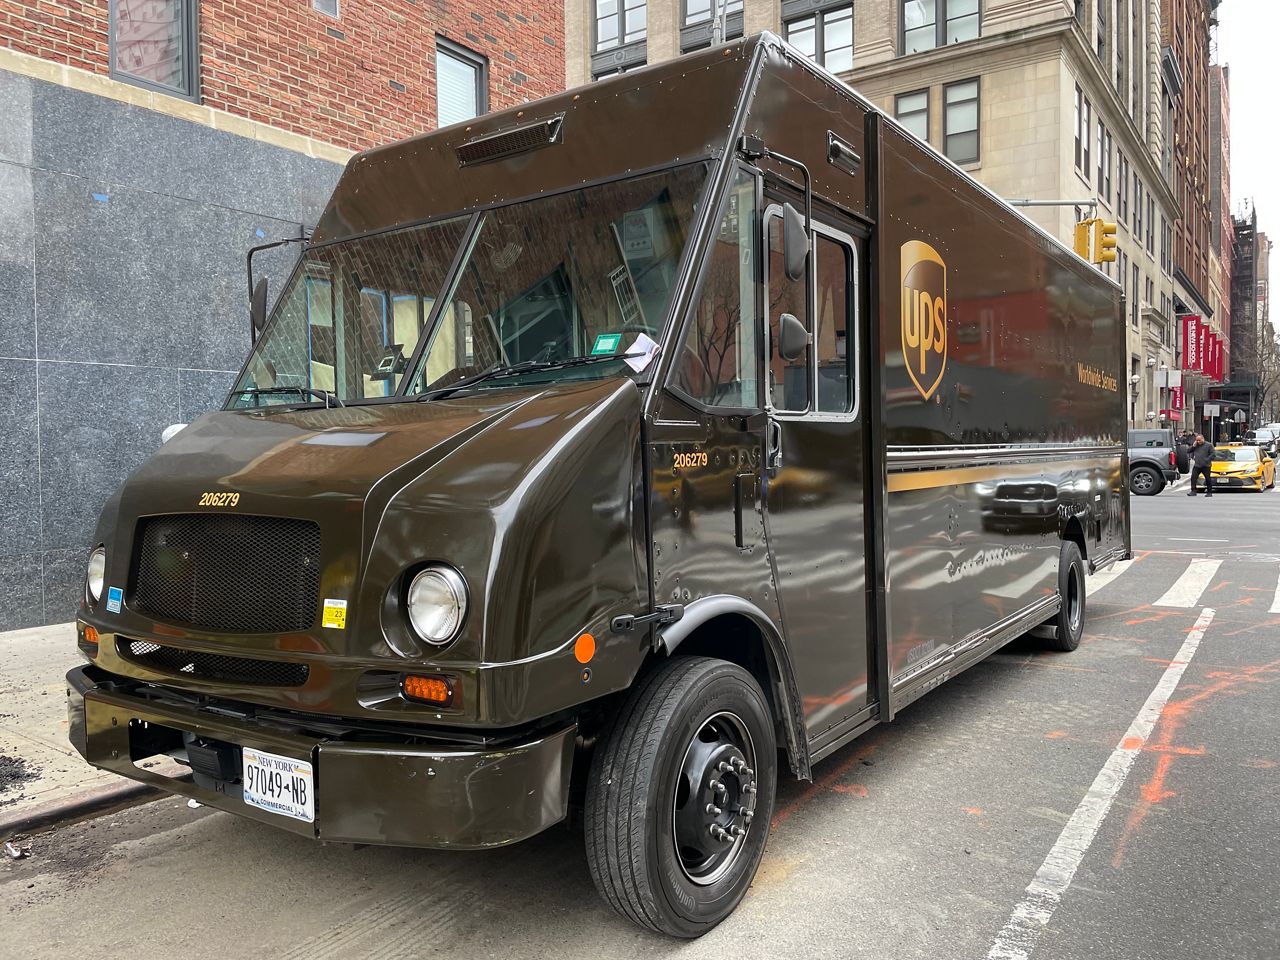 A UPS truck is pictured in the city.